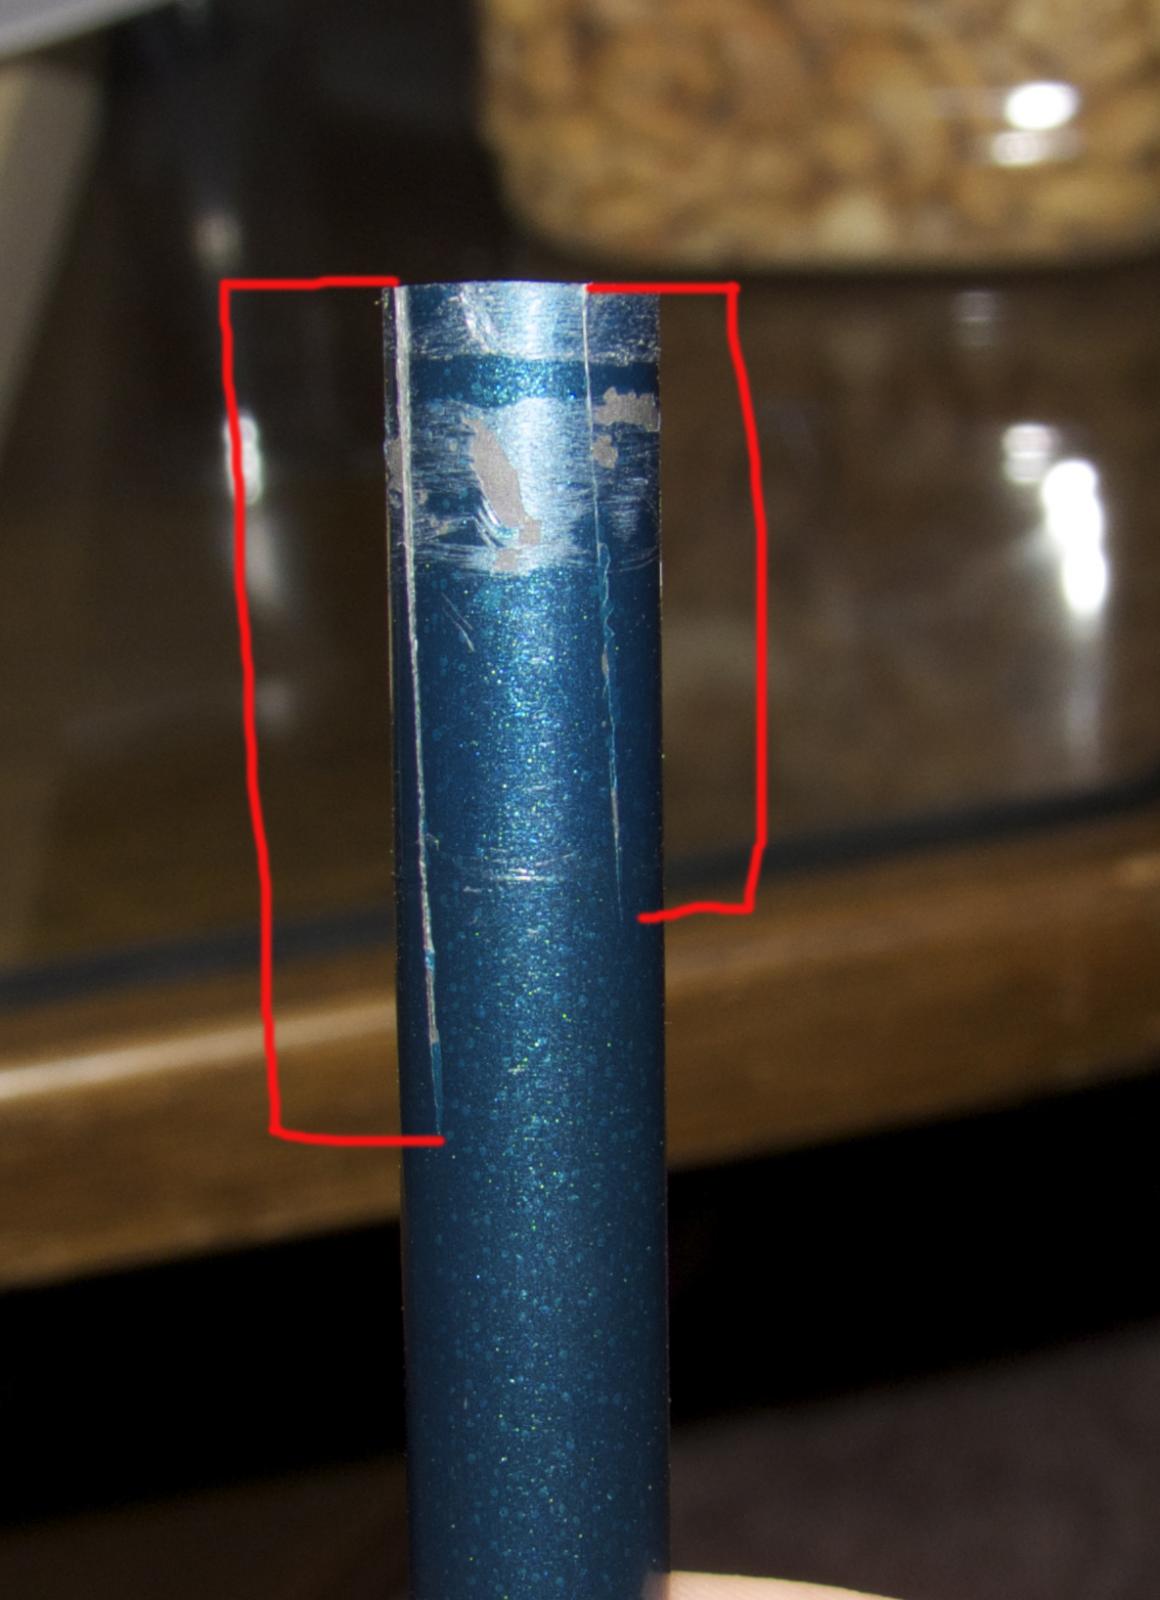 Broken ferrule from travel rod set up; can it be fixed? : r